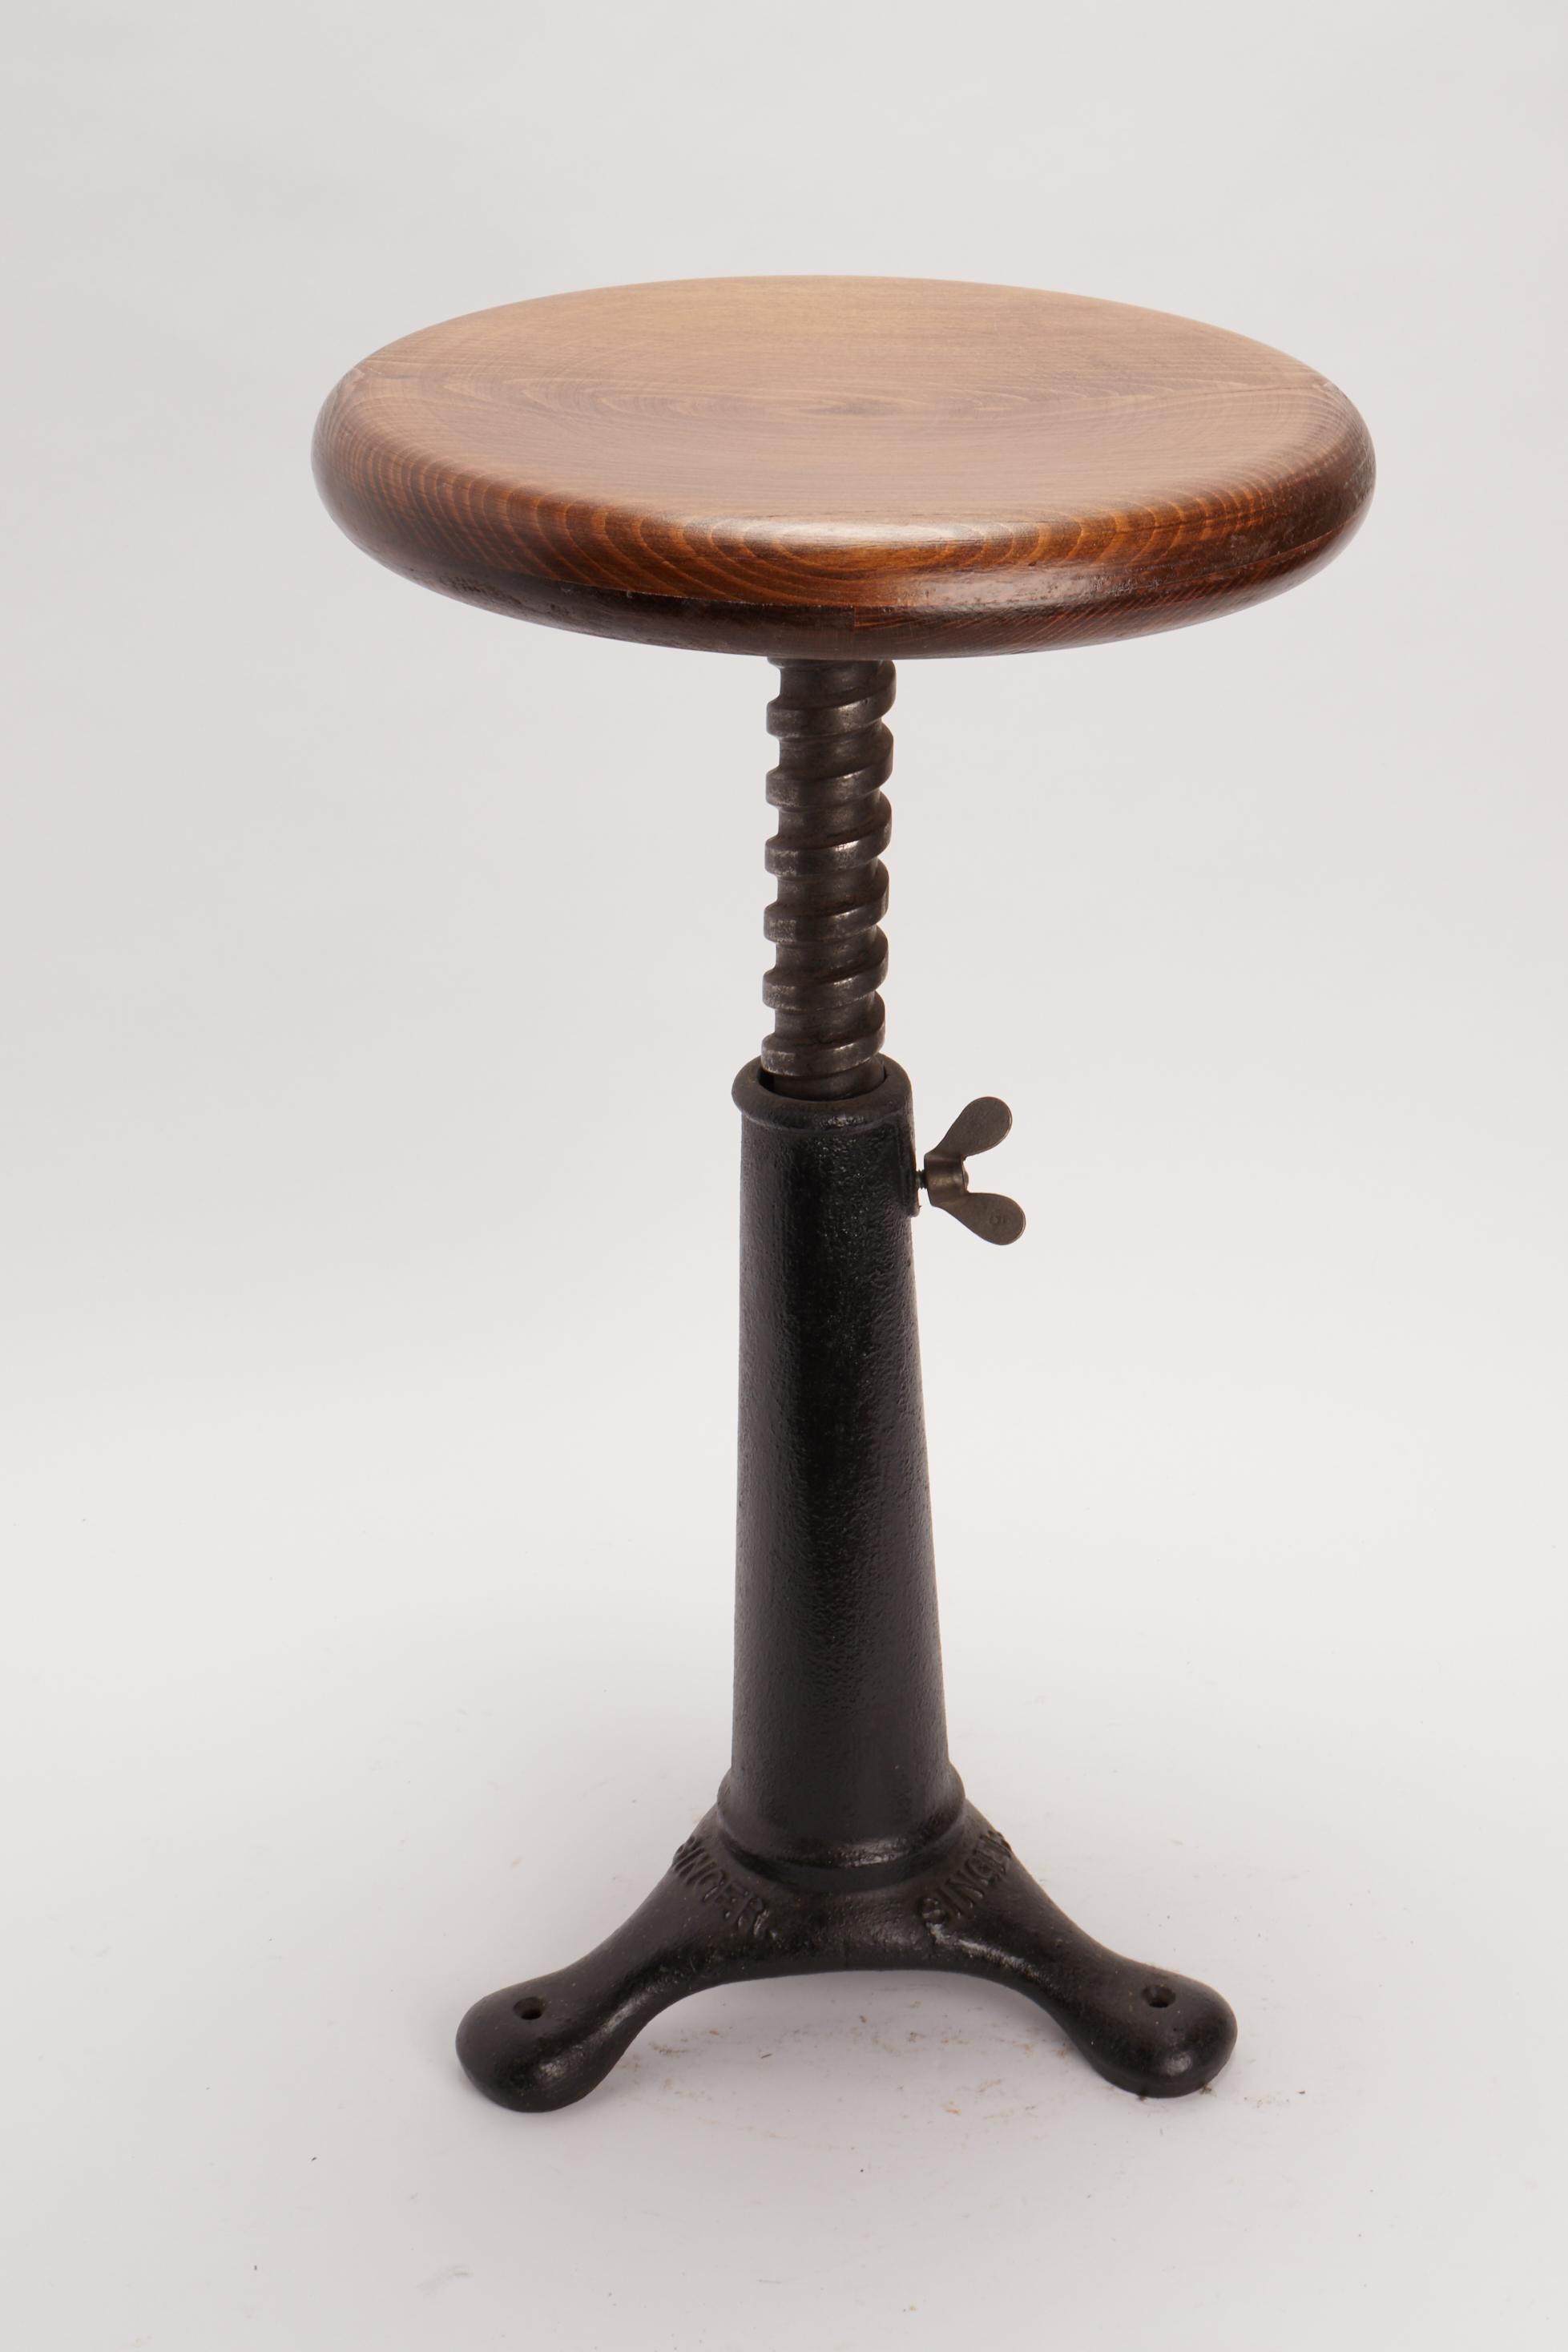 In 1910 Singer produced this adjustable stool for the textile industry. The leg is made out of cast iron and the sit is made out of solid Oak wood. Screwing or unscrewing the thick screw is possible to adjust the size of the stool. ( 31